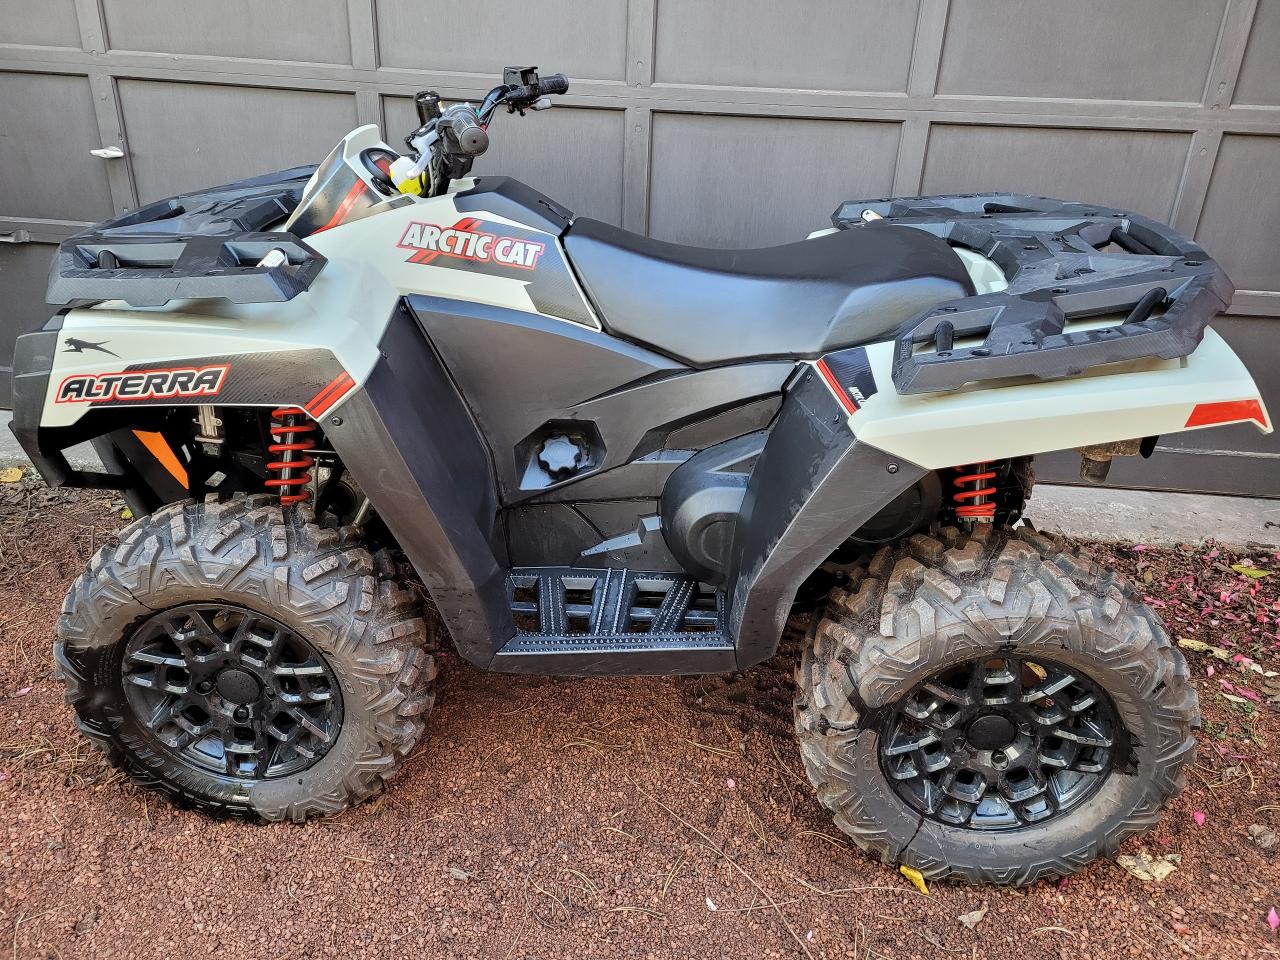 2022 Arctic Cat Alterra 600 LTD 1-Owner, Financing Available, Trade-ins Welcome! - Photo #1